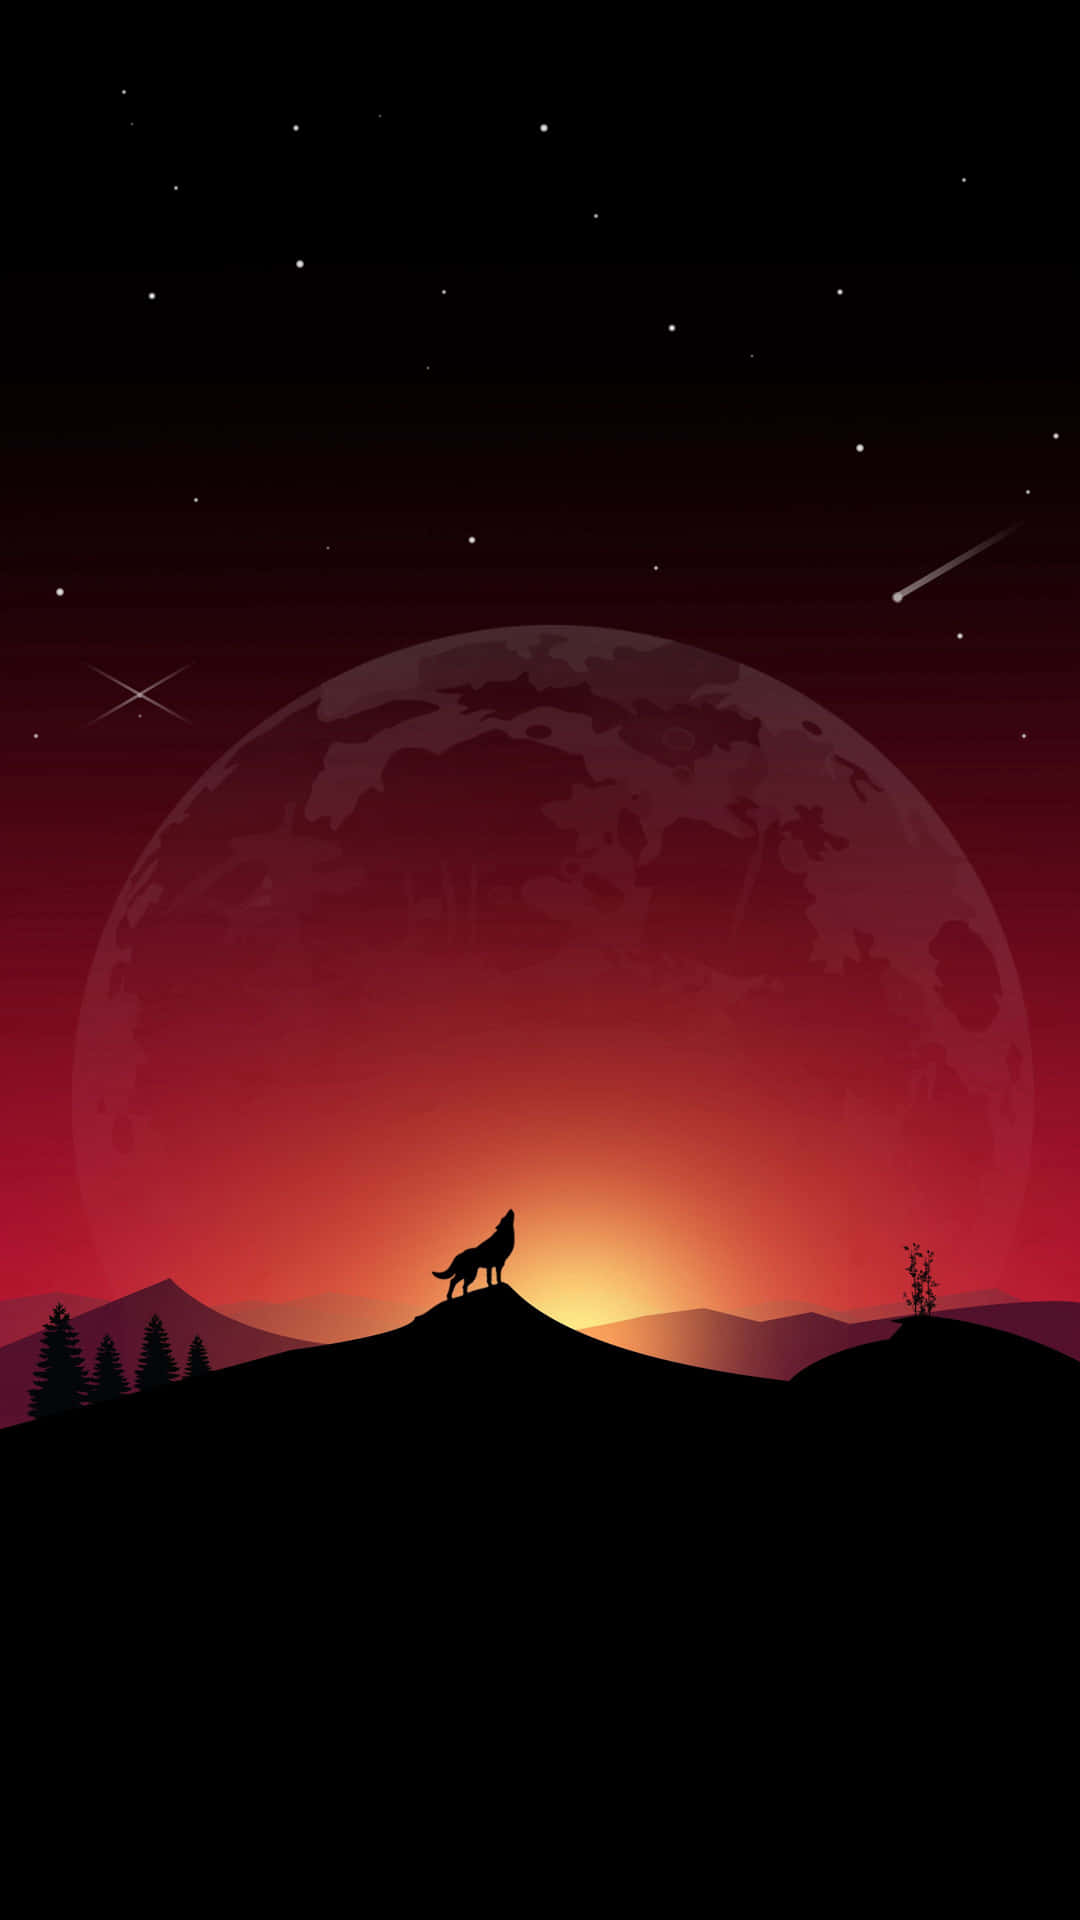 “Majestic Wolf Howling at the Moon” Wallpaper